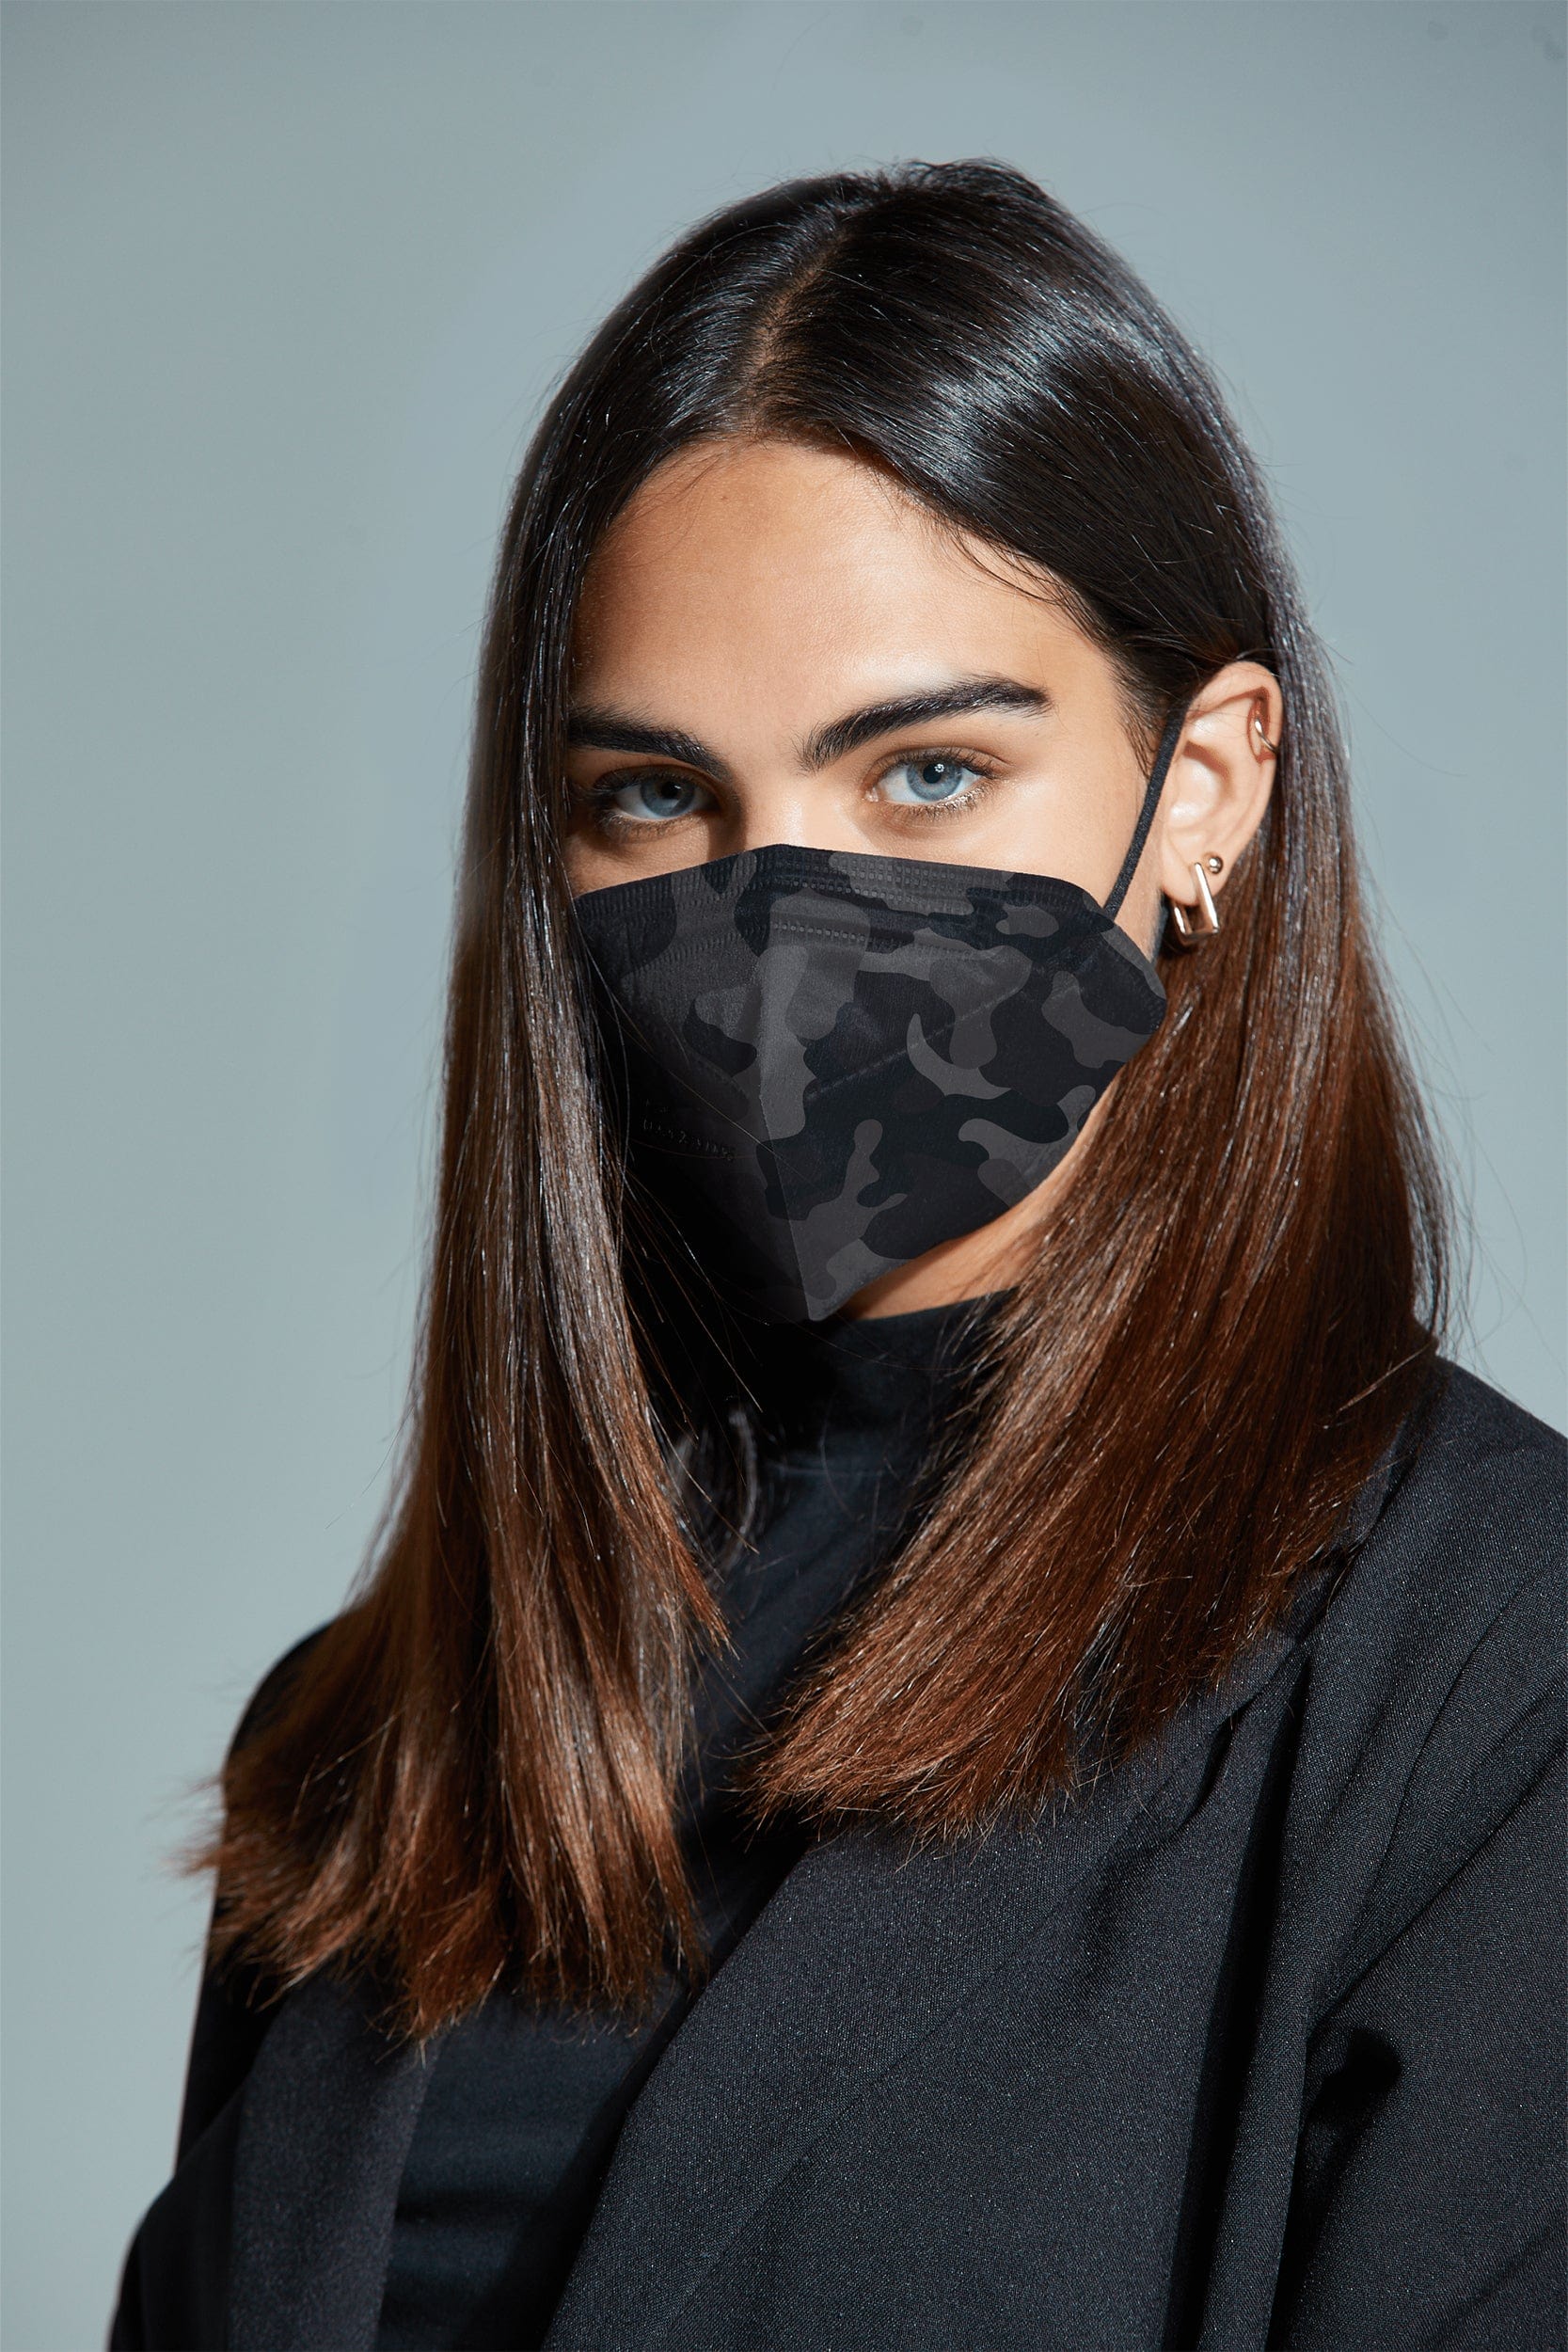 Woman wearing stylish Black Camo printed KN95 face mask, with high quality breathable fabric.